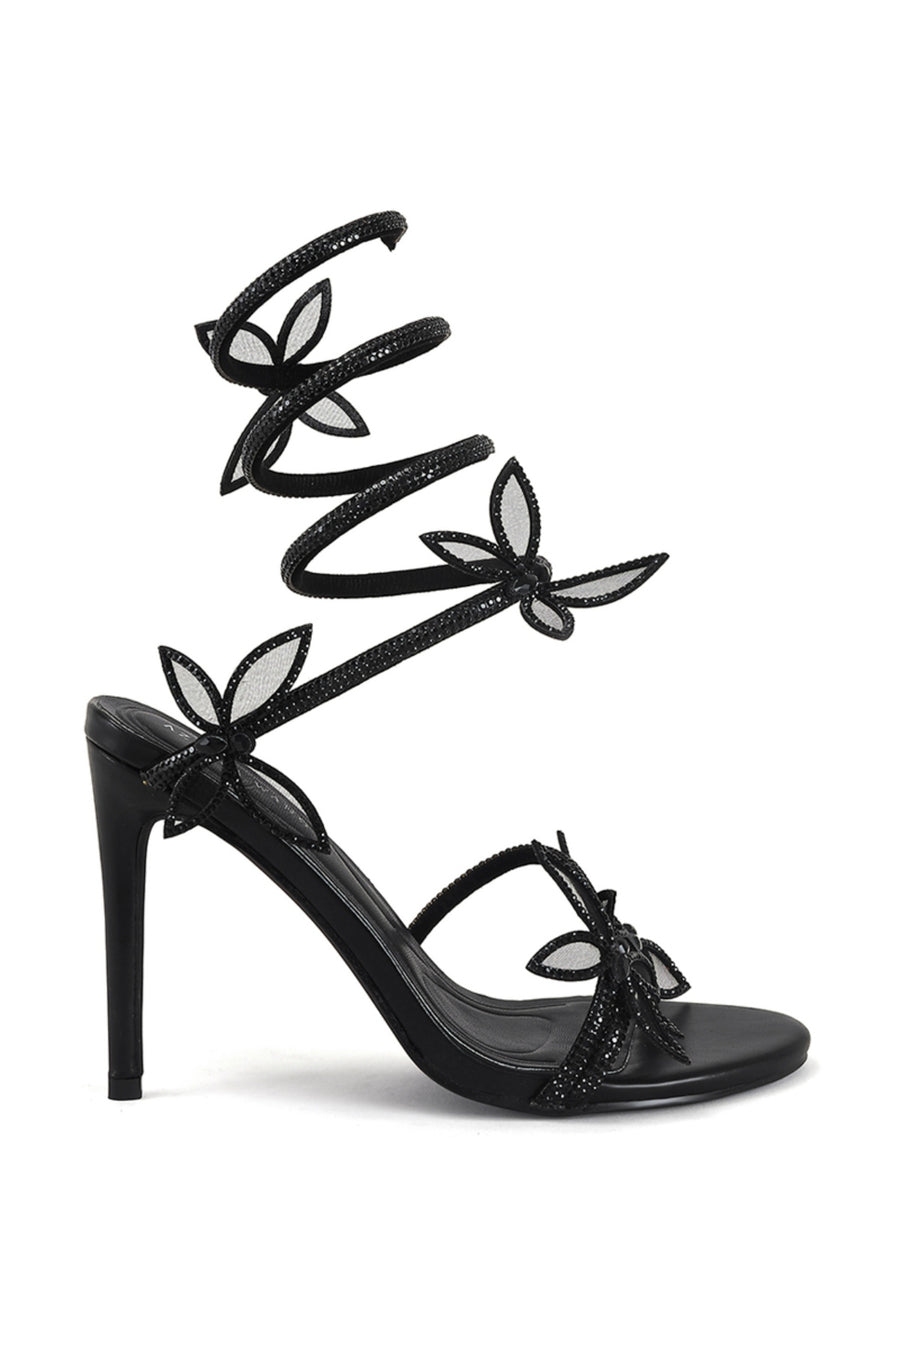 black open toe stiletto heels with black crystal embellished wrap up cords completed with butterfly accents